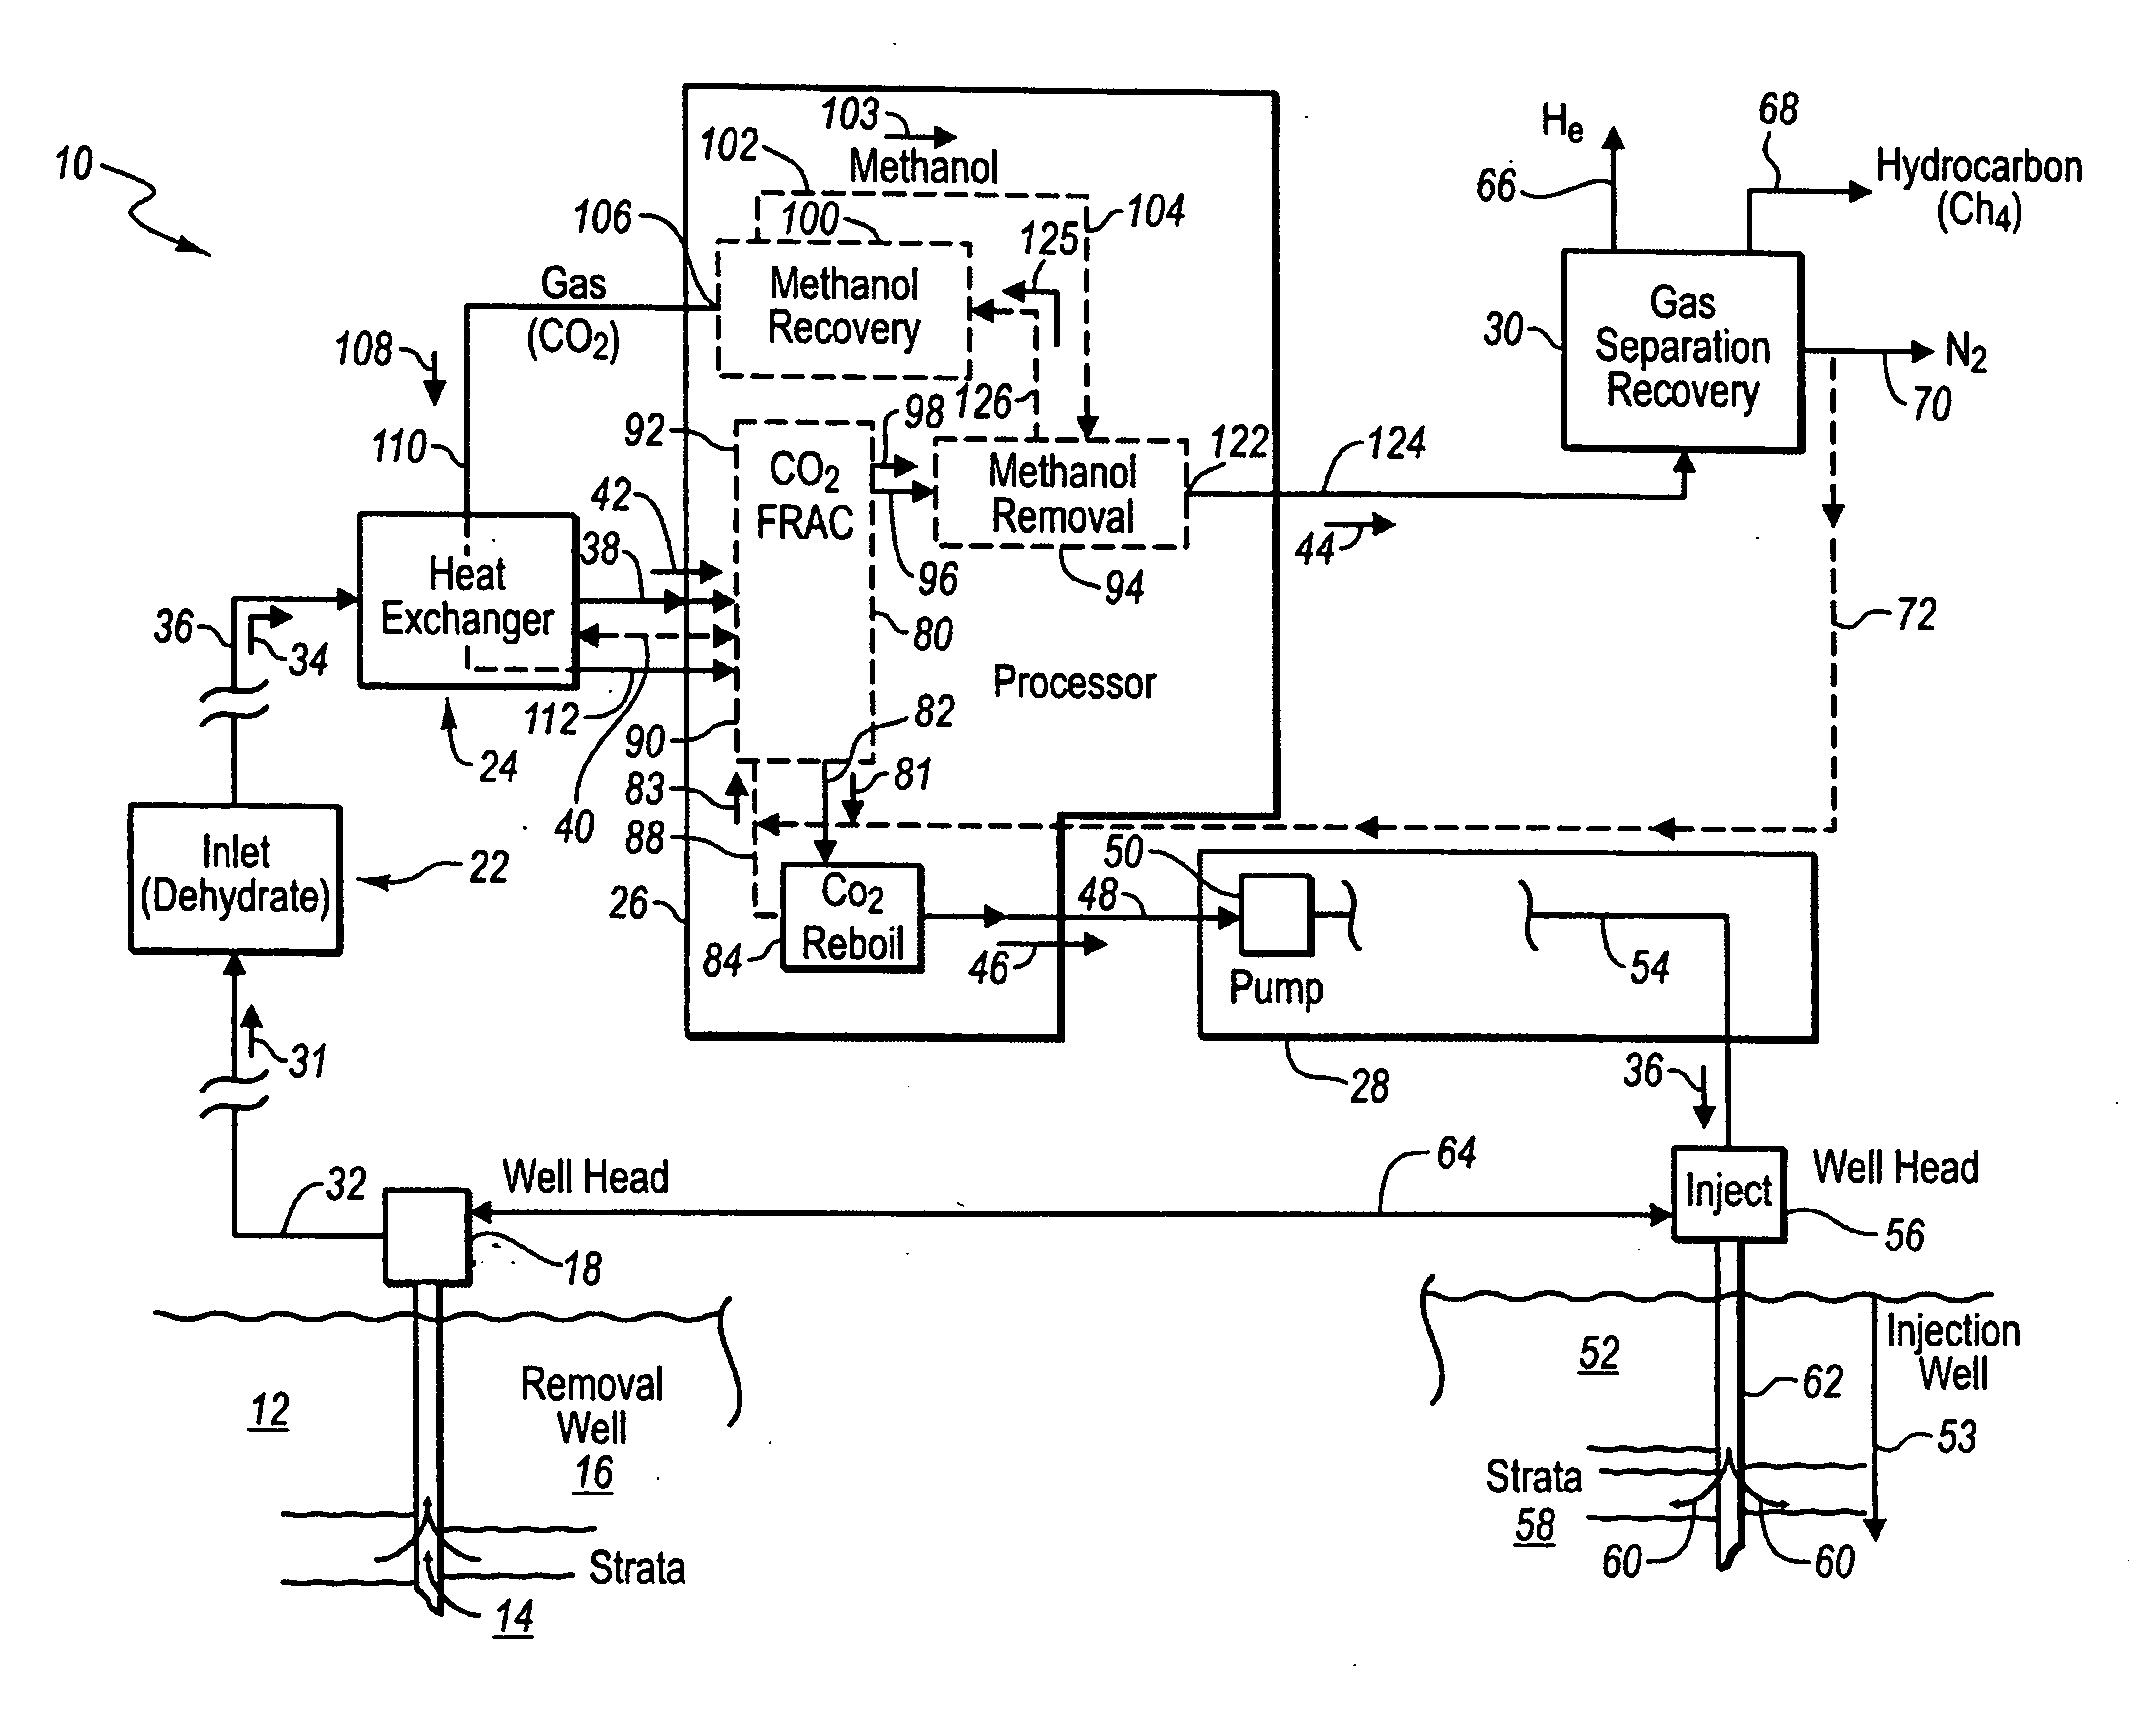 System for Dehydrating and Cooling a Produced Gas to Remove Natural Gas Liquids and Waste Liquids